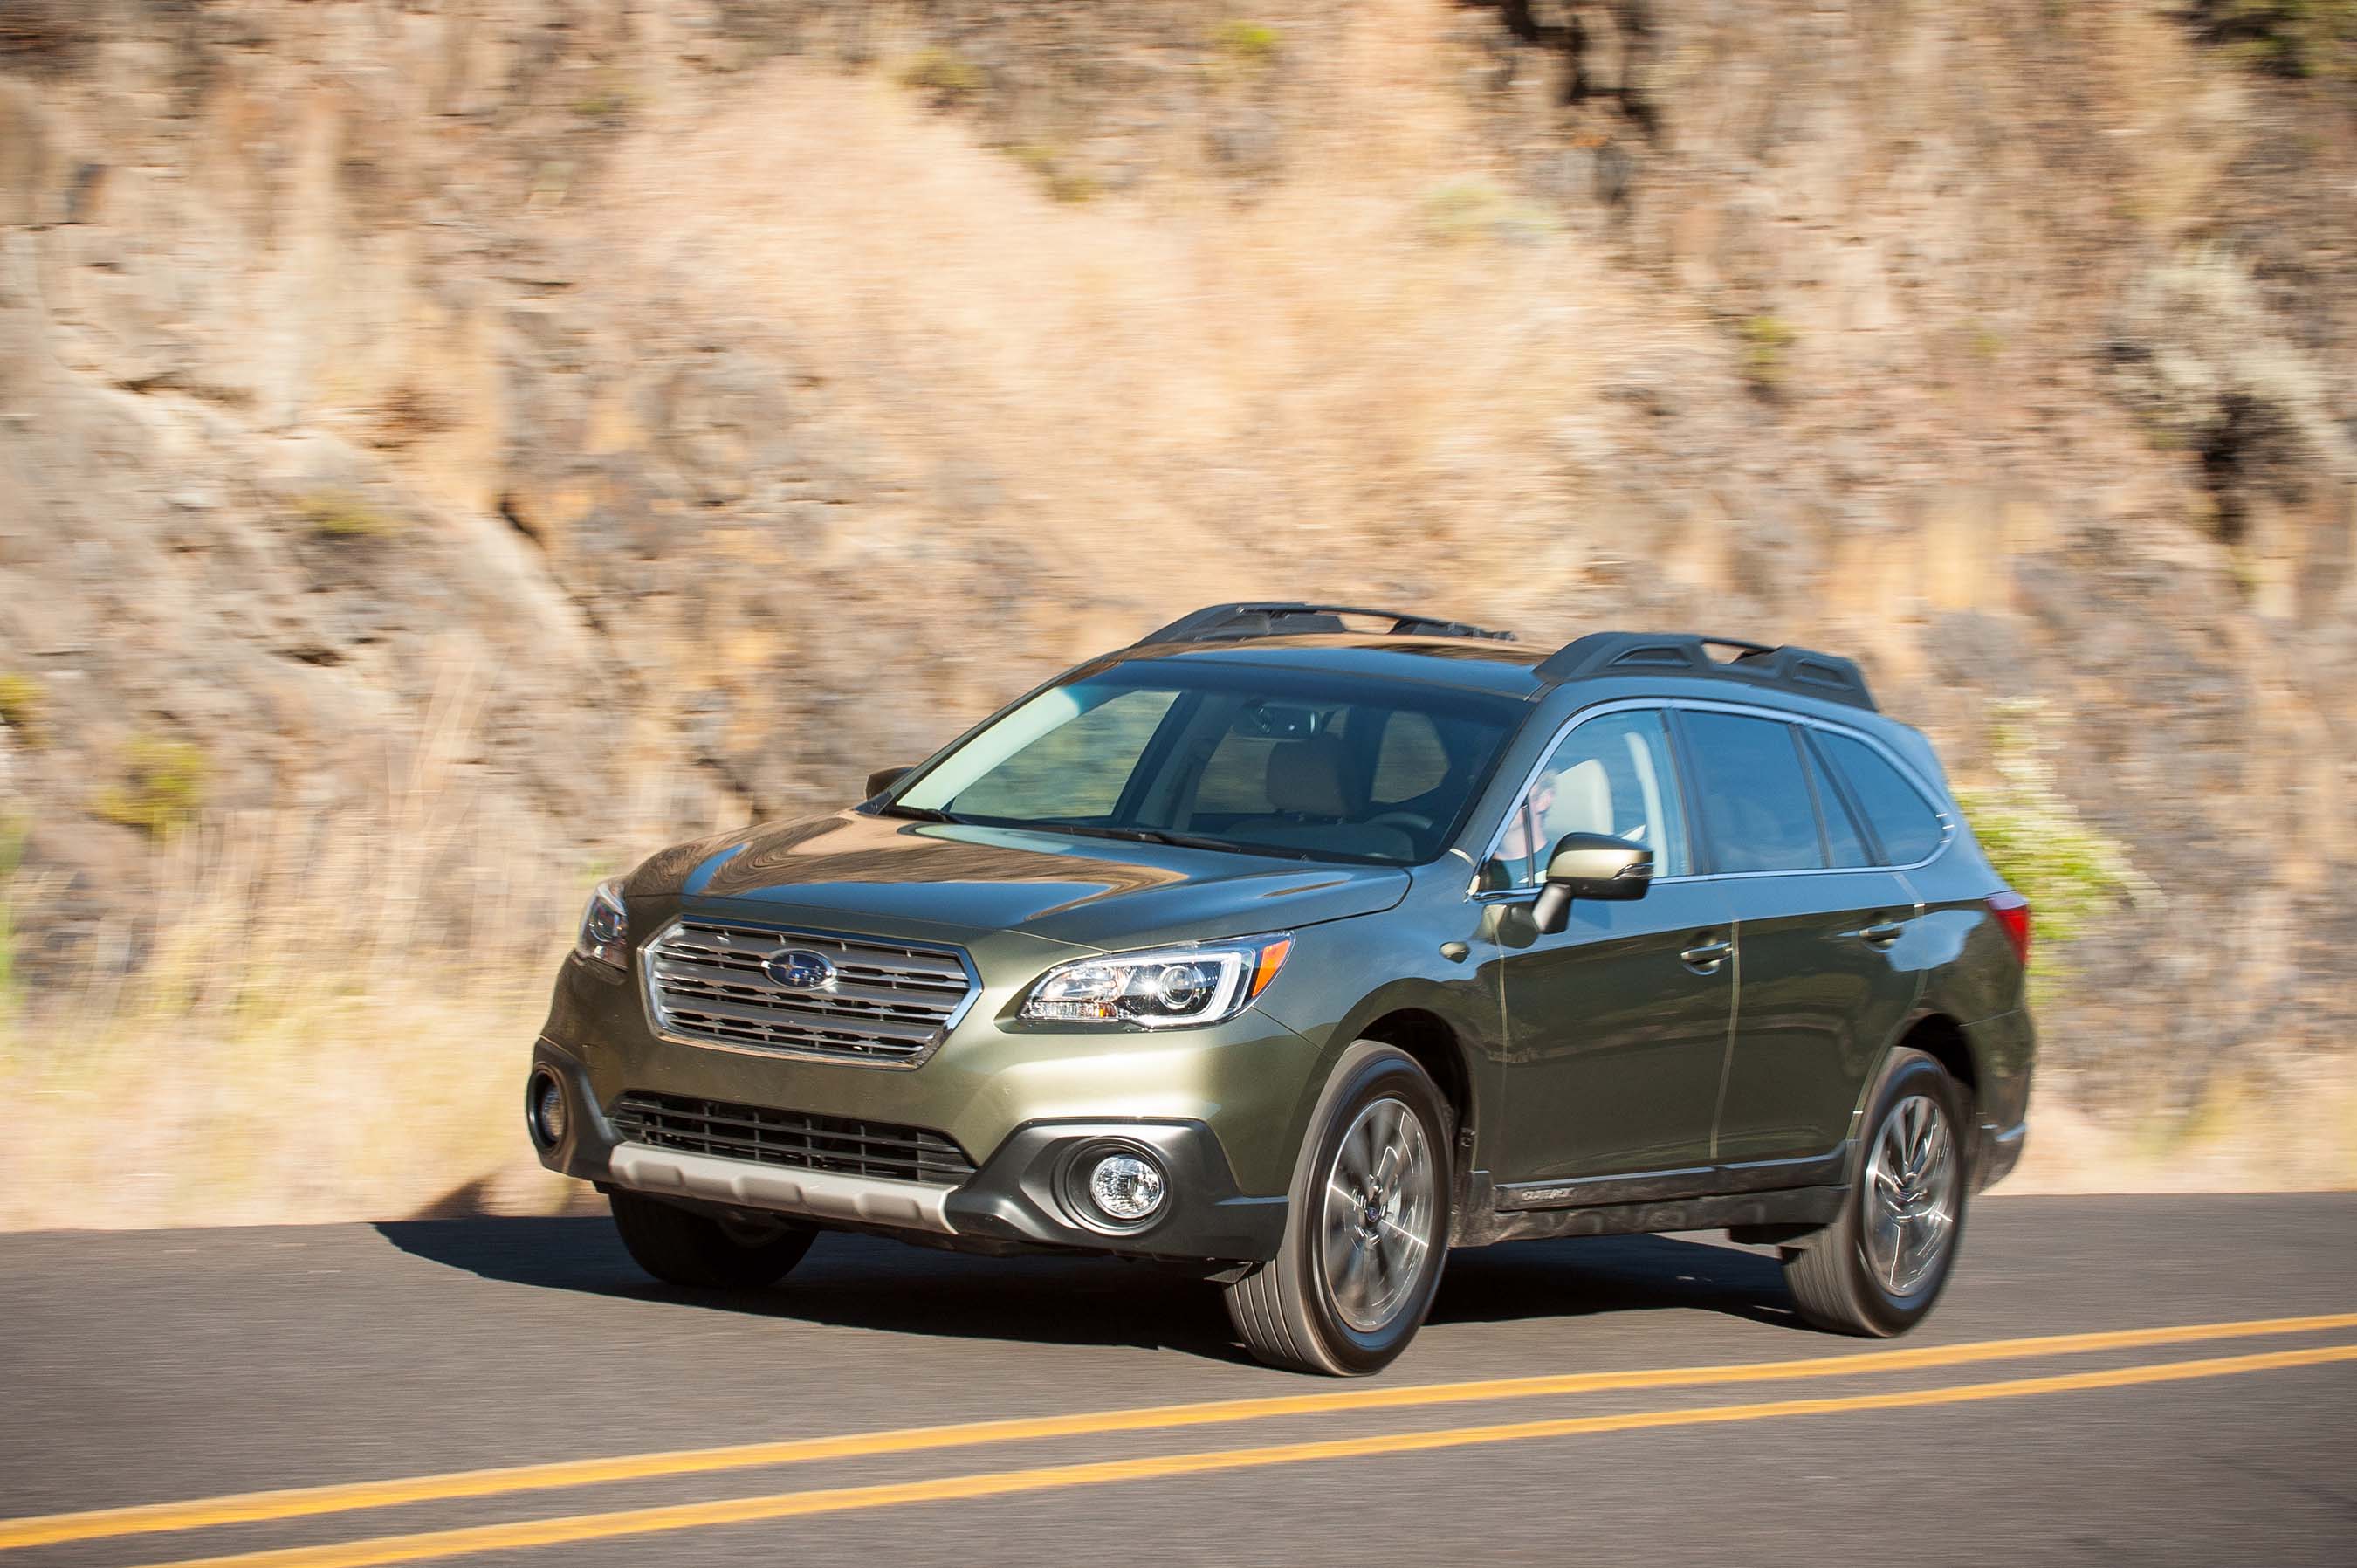 KBB.com 16 Best Family Car: Several of KBB.com’s editors agreed that if we could only recommend one car to a majority of buyers, the 2016 Subaru Outback could satisfy the needs of an impressive many.